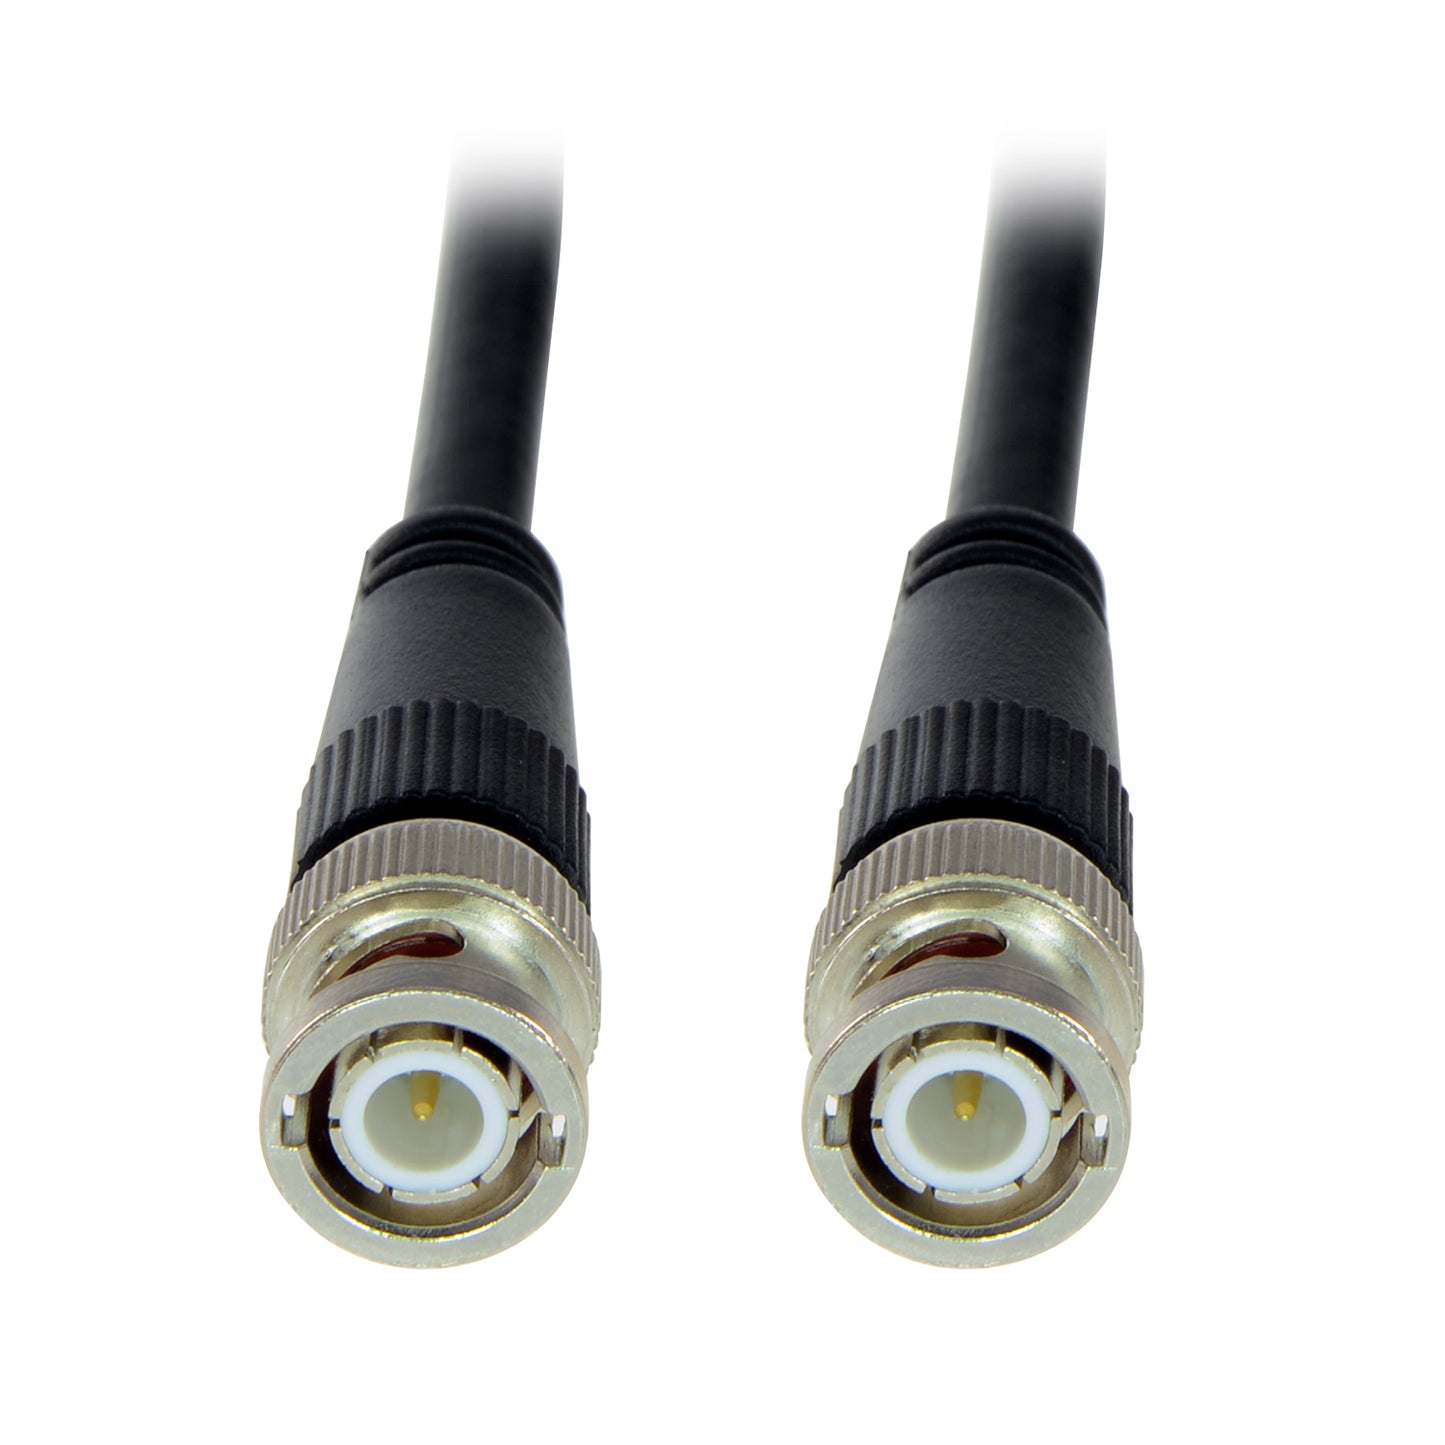 Prepared coaxial cable - BNC male to BNC male - RG59 coaxial - Length 1m - For female Balun connections to DVR - Robust construction